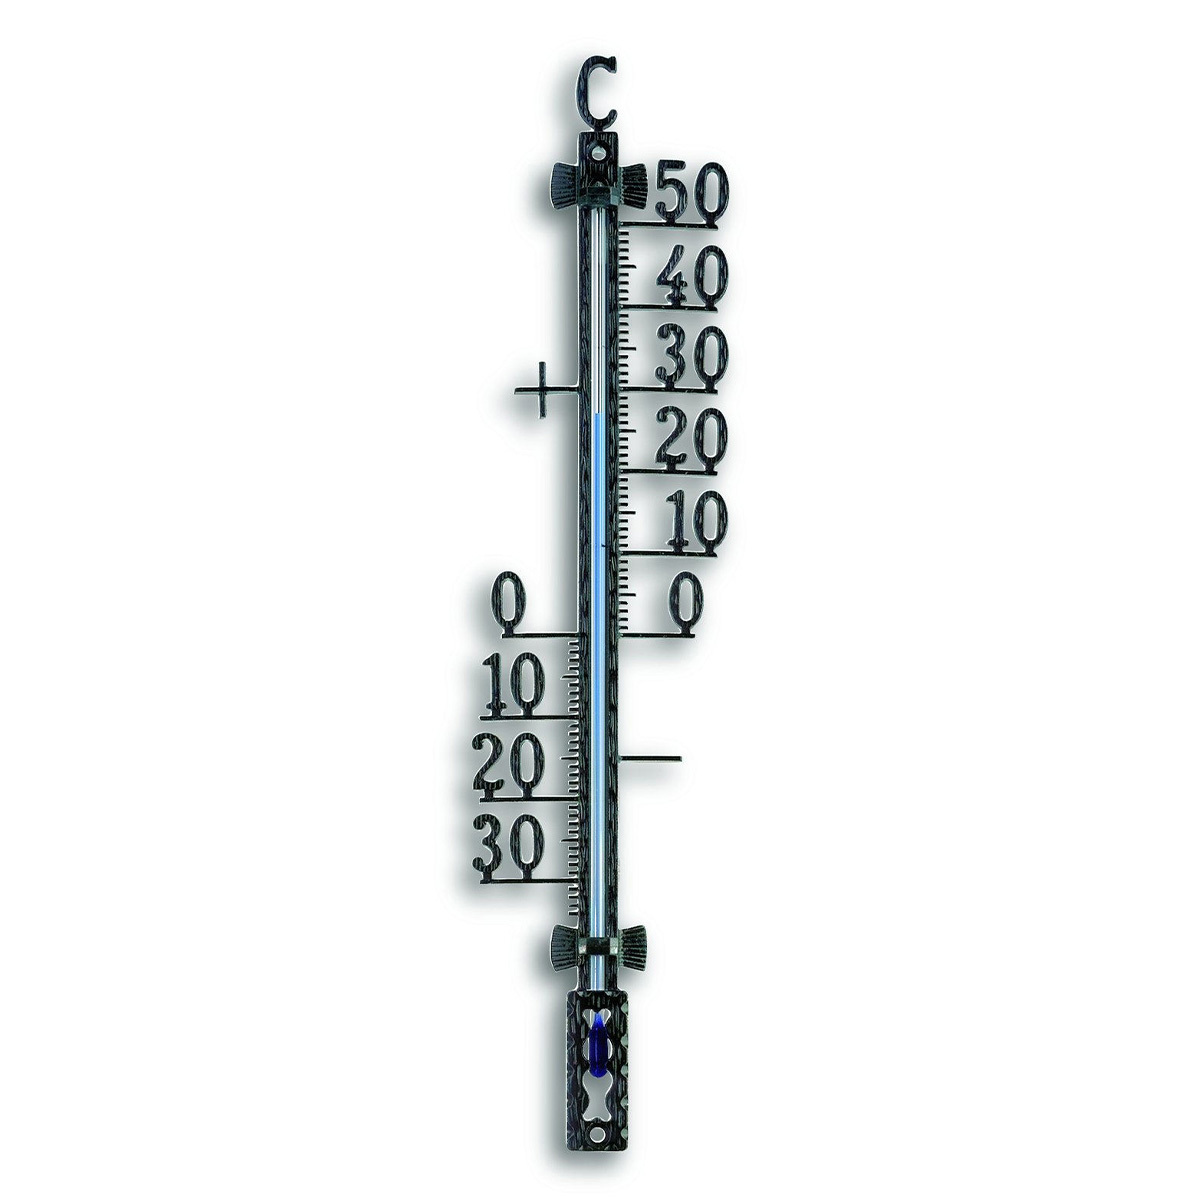 Analogue outdoor thermometer made of metal